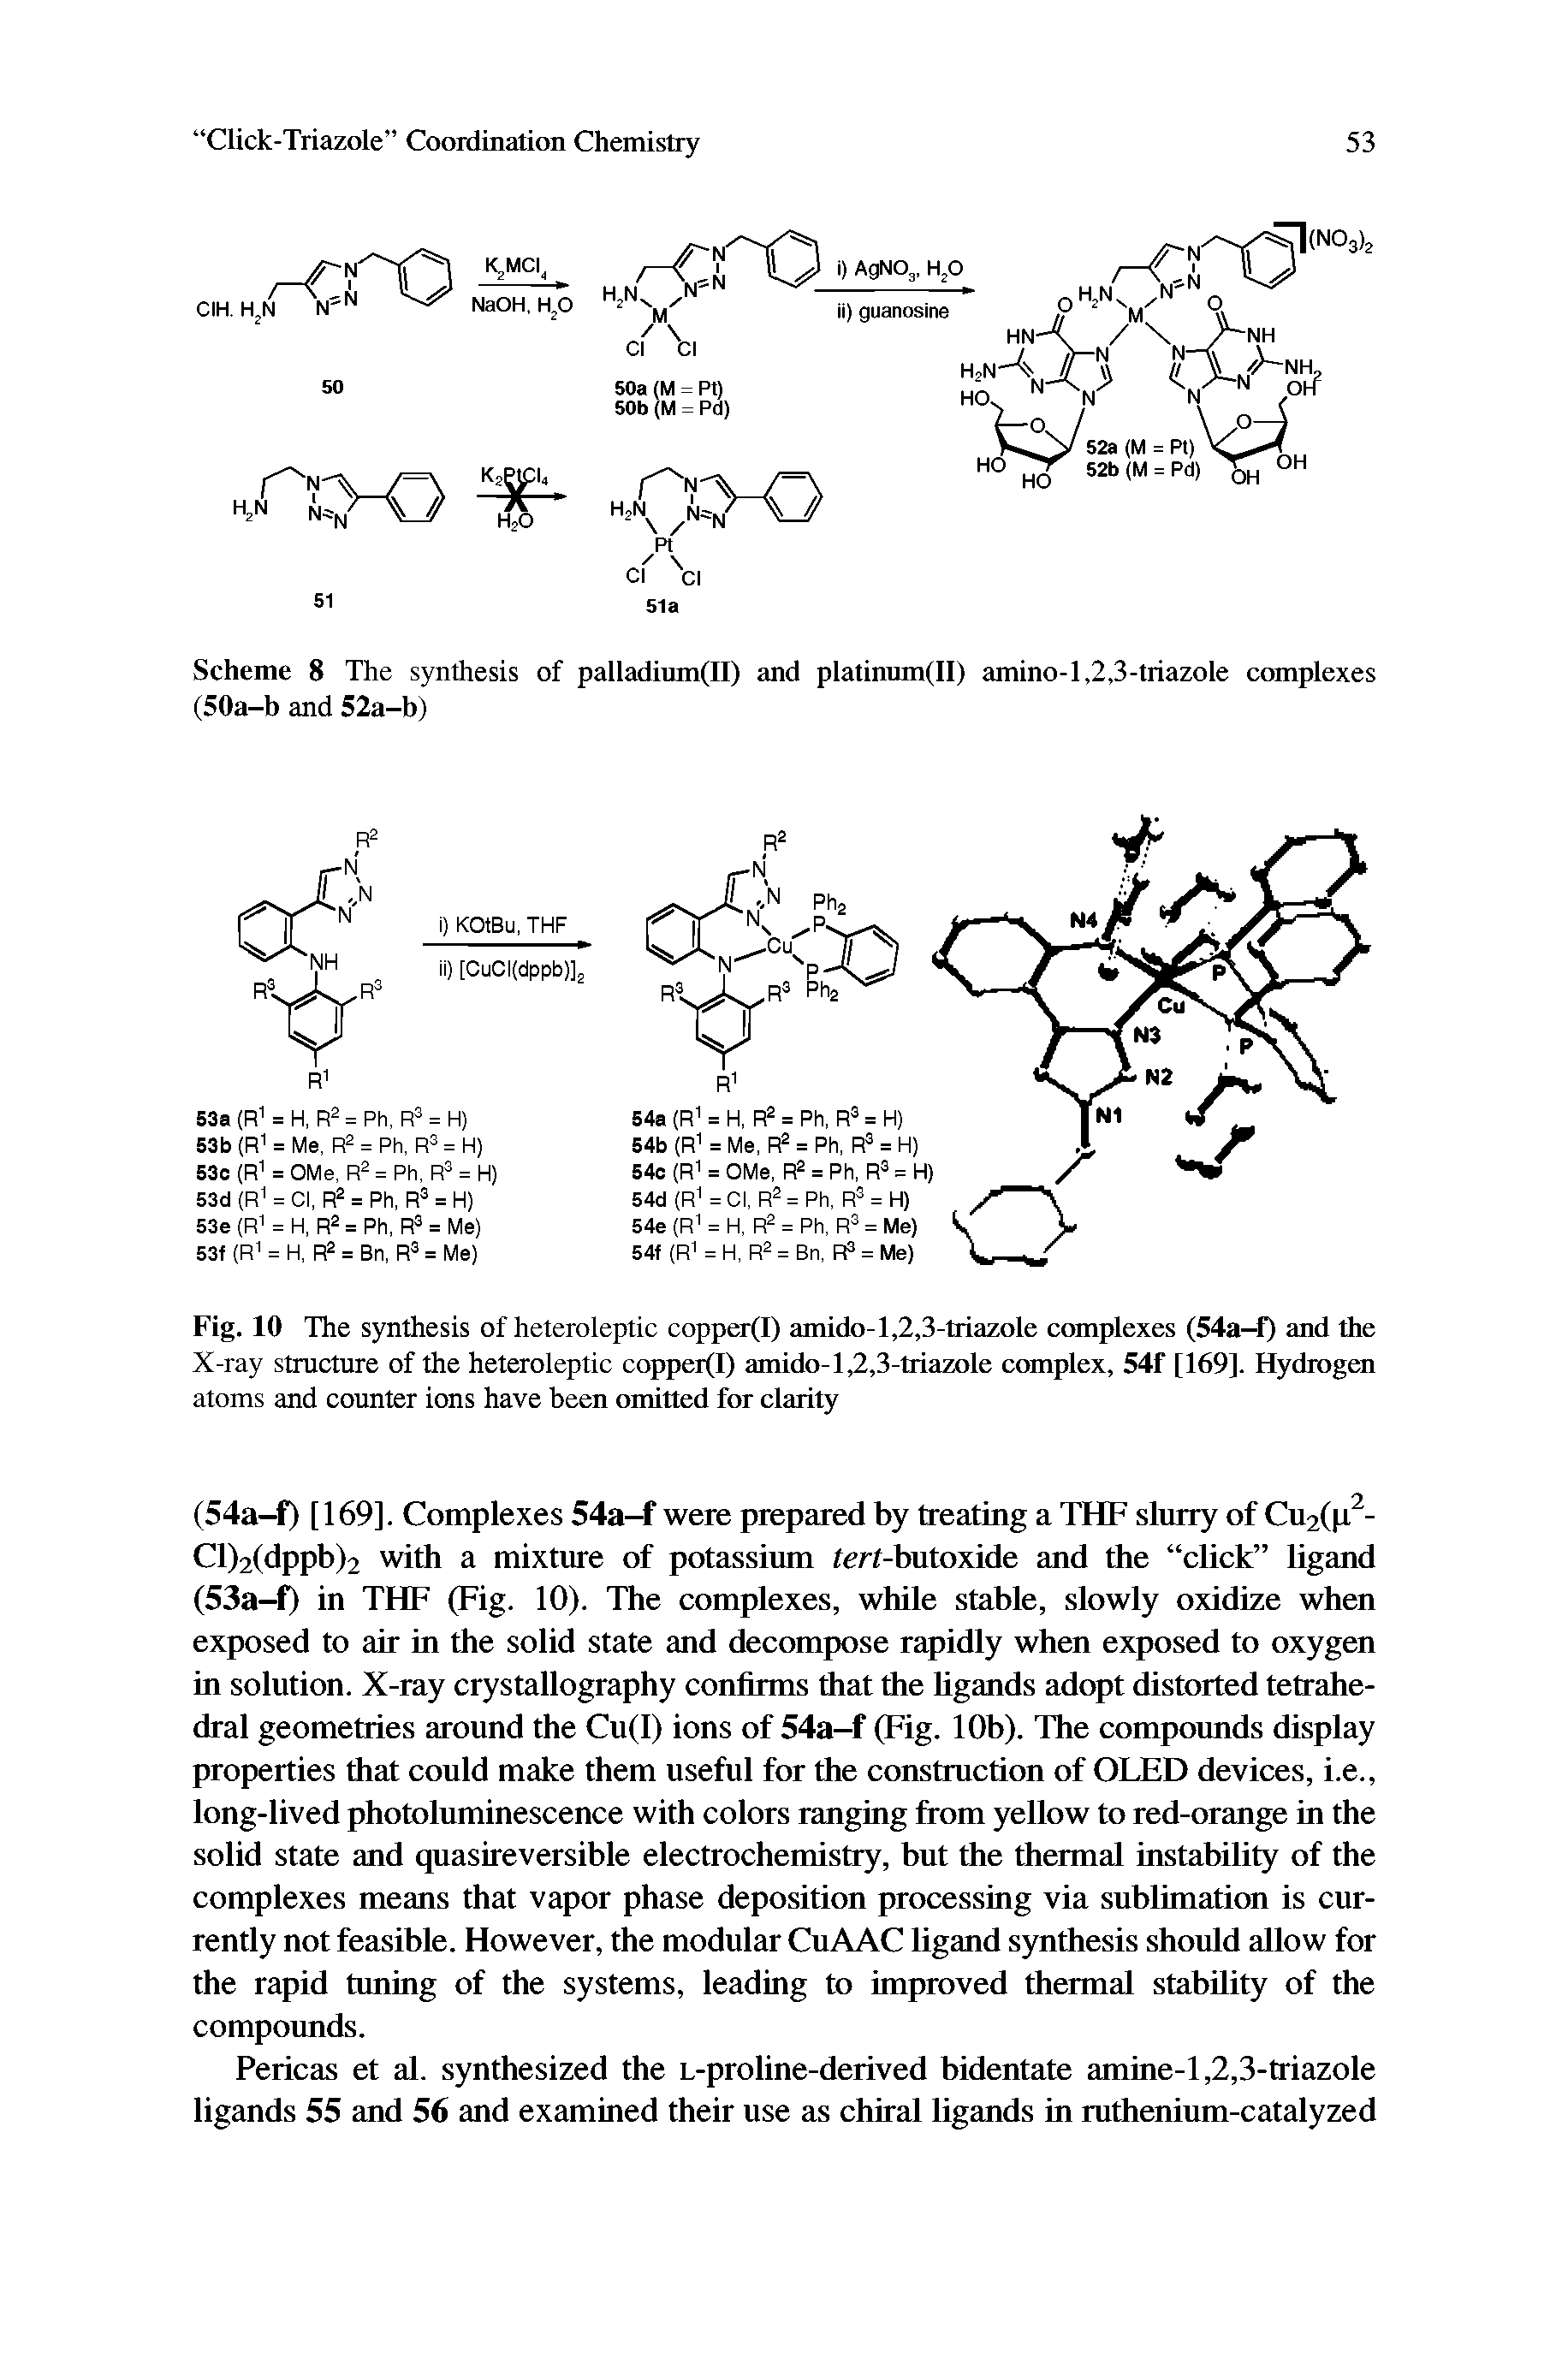 Fig. 10 The synthesis of heteroleptic copper amido-l,2,3-triazole complexes (54a-f) and the X-ray structure of the heteroleptic copper(I) amido-1,2,3-triazole complex, 54f [169]. Hydrogen atoms and counter ions have been omitted for clarity...